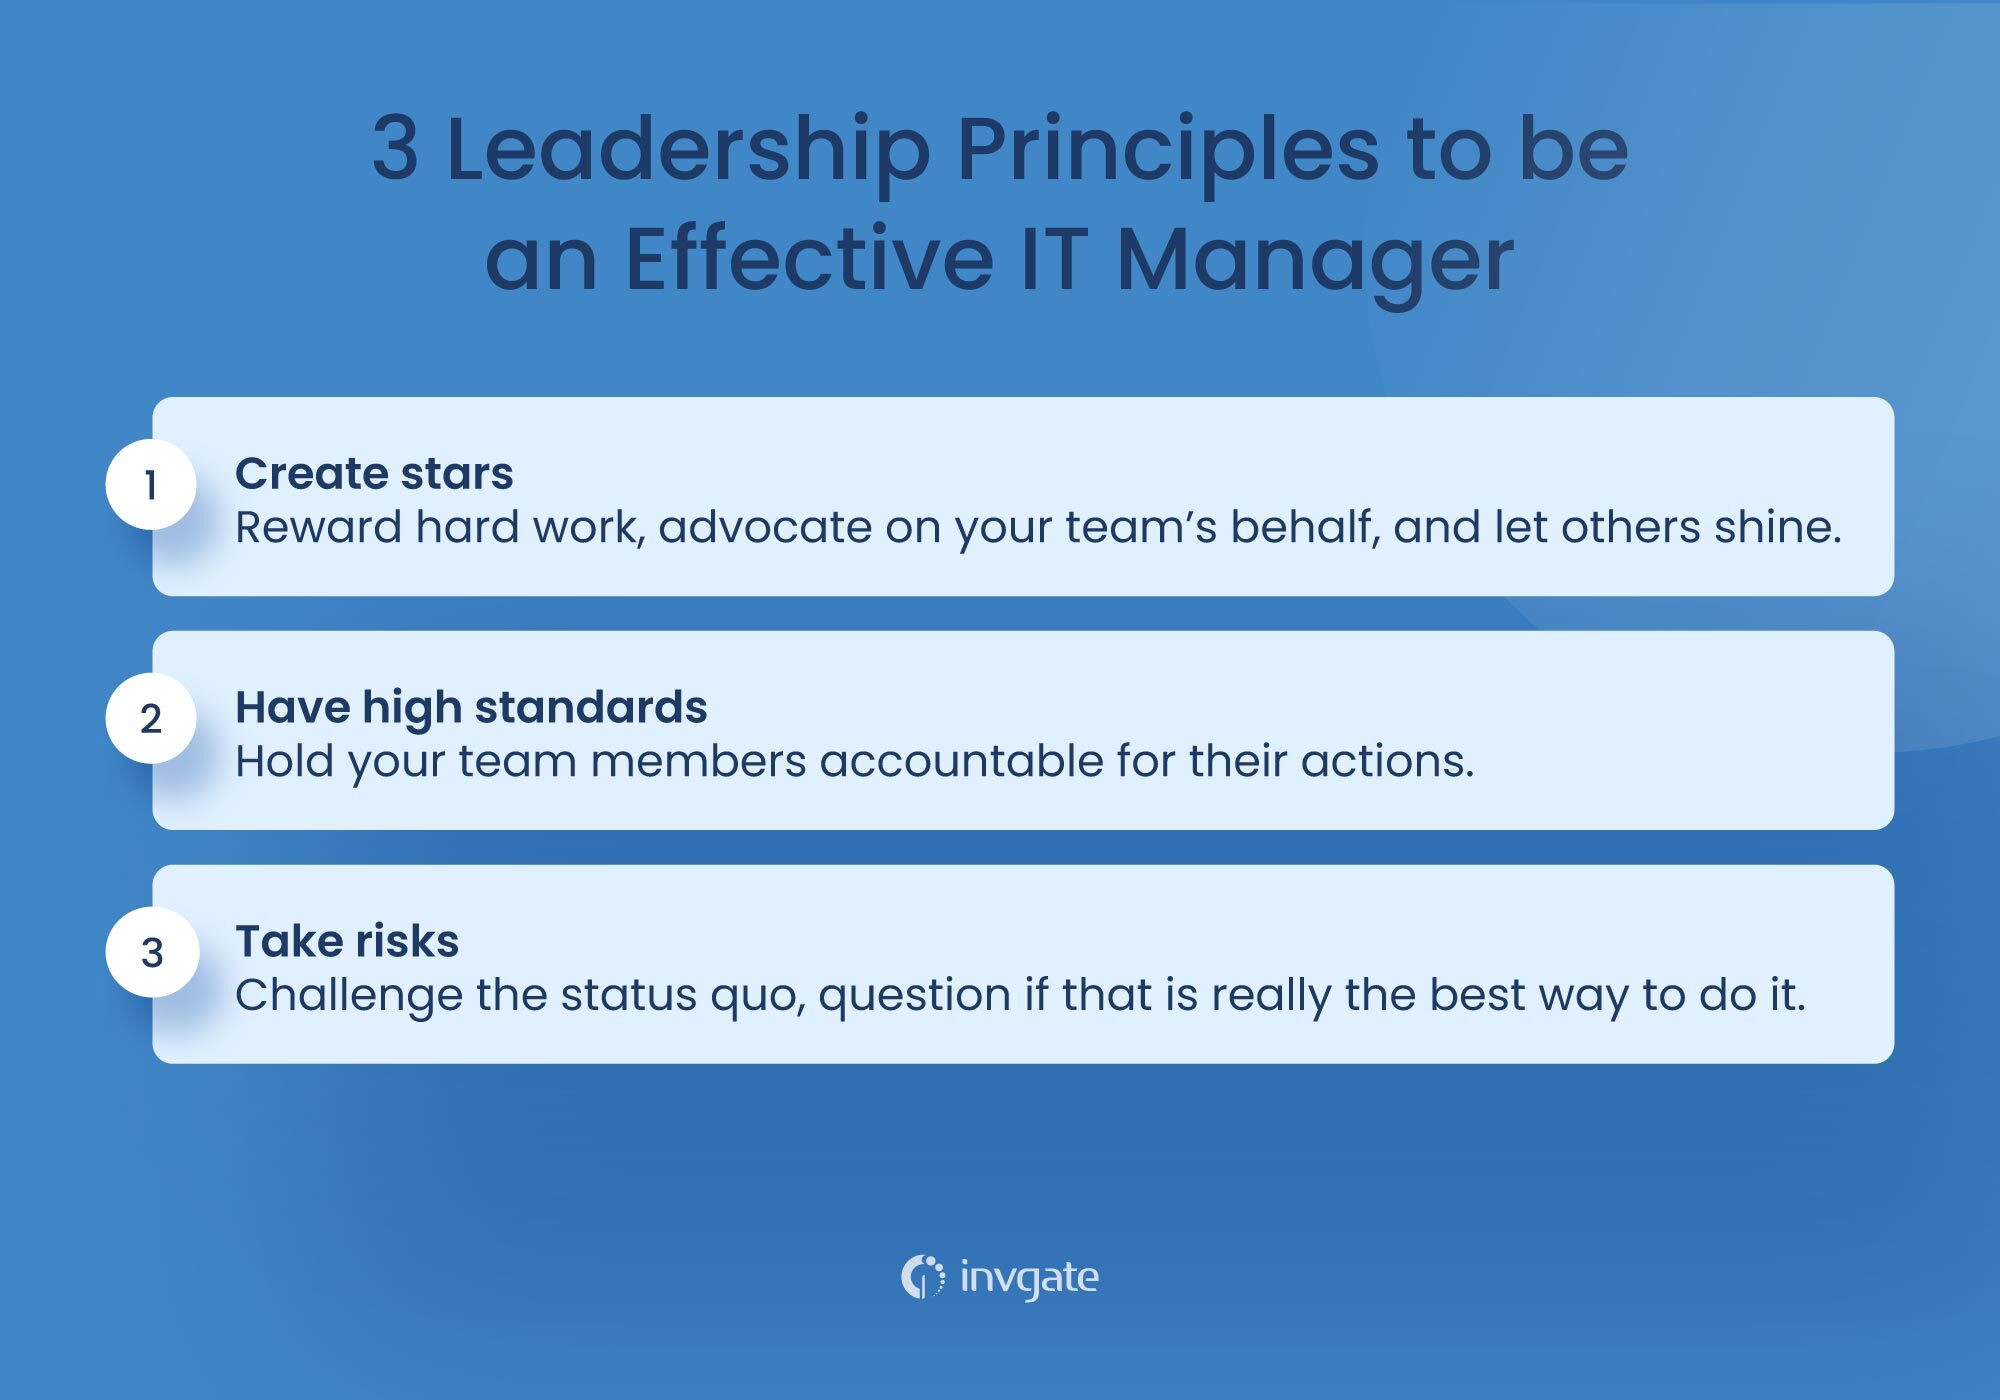 These are the three leadership principles to be an effective IT manager.